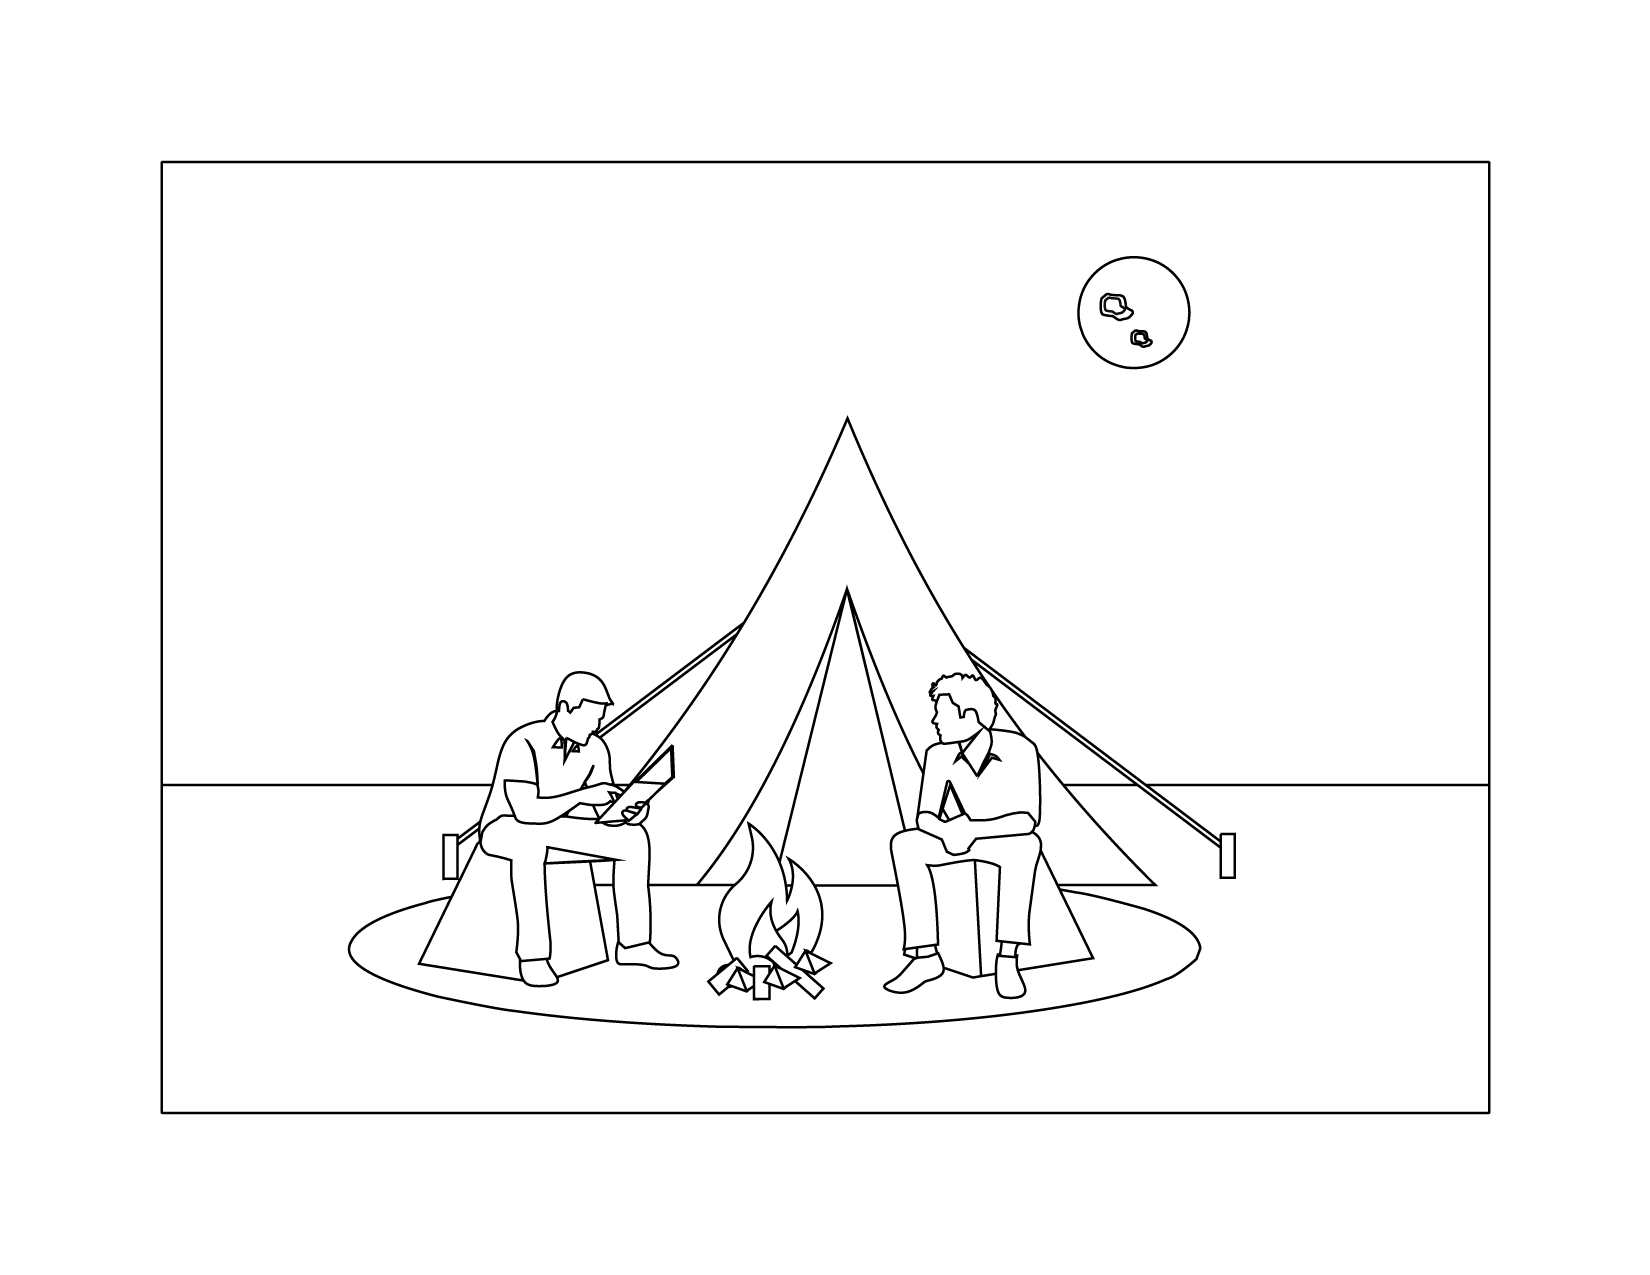 Friends Camping Coloring Page